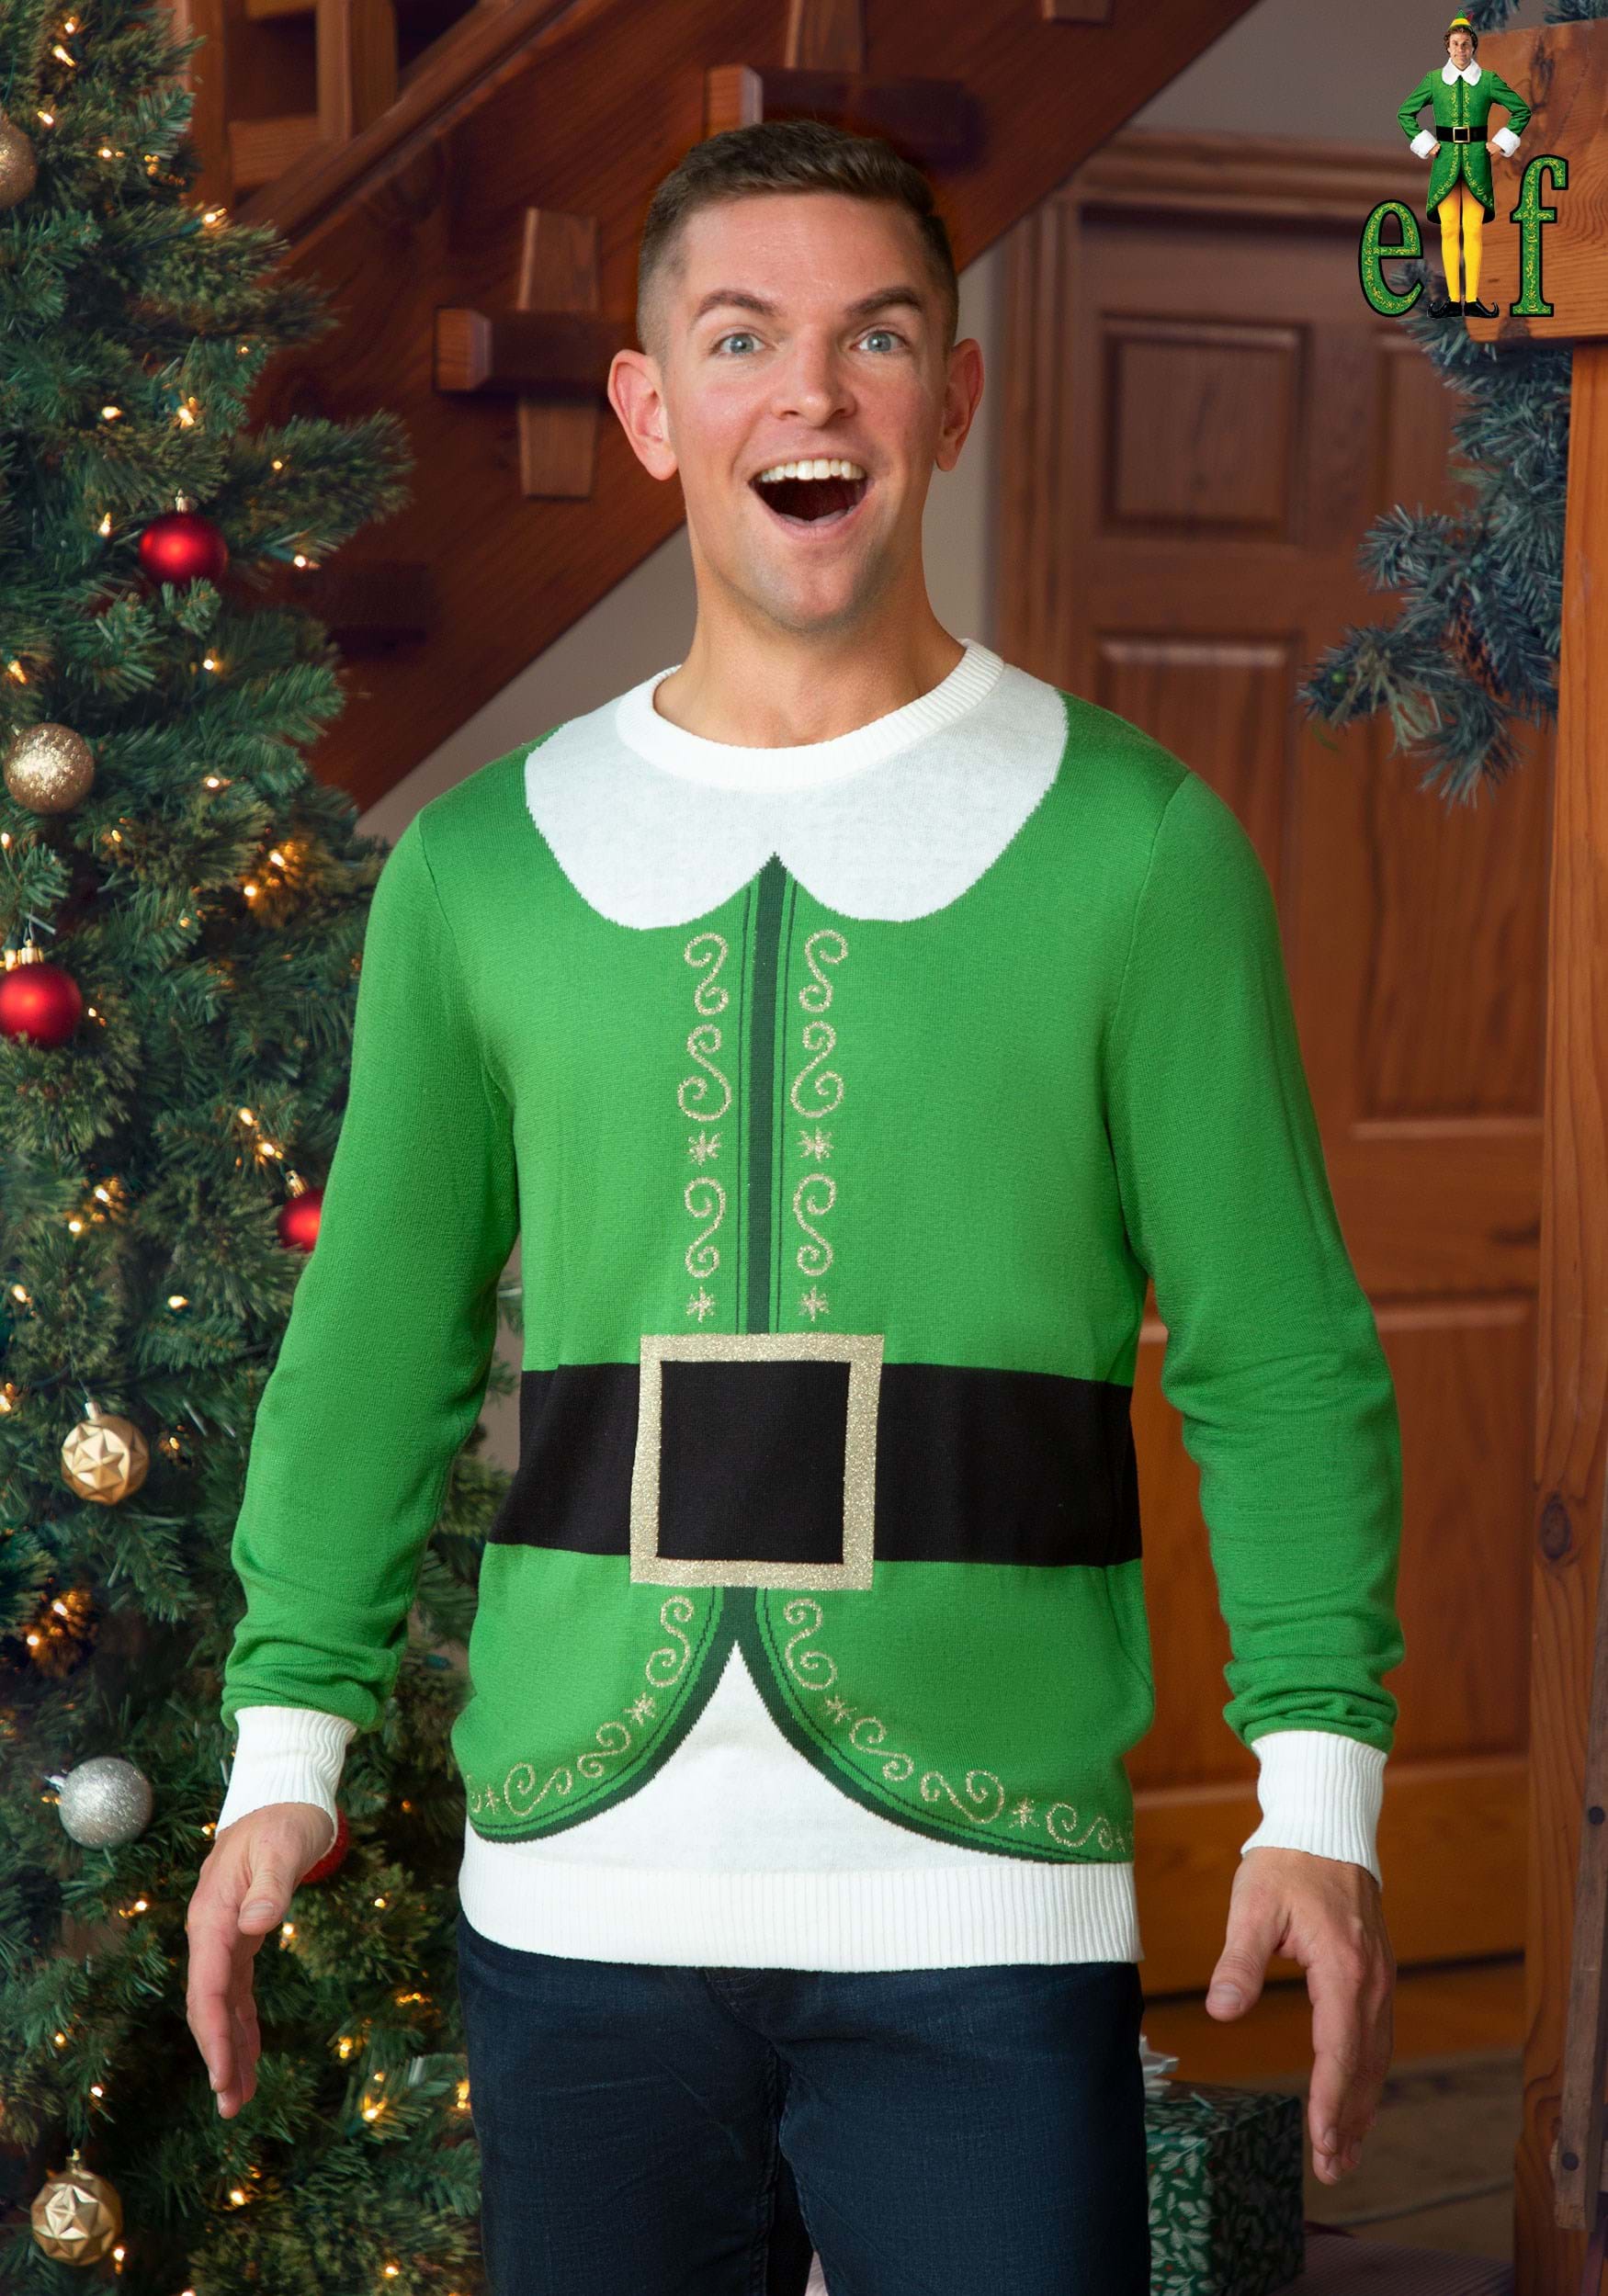 https://images.halloweencostumes.com/products/70935/1-1/adult-buddy-the-elf-ugly-christmas-sweater-2-upd.jpg